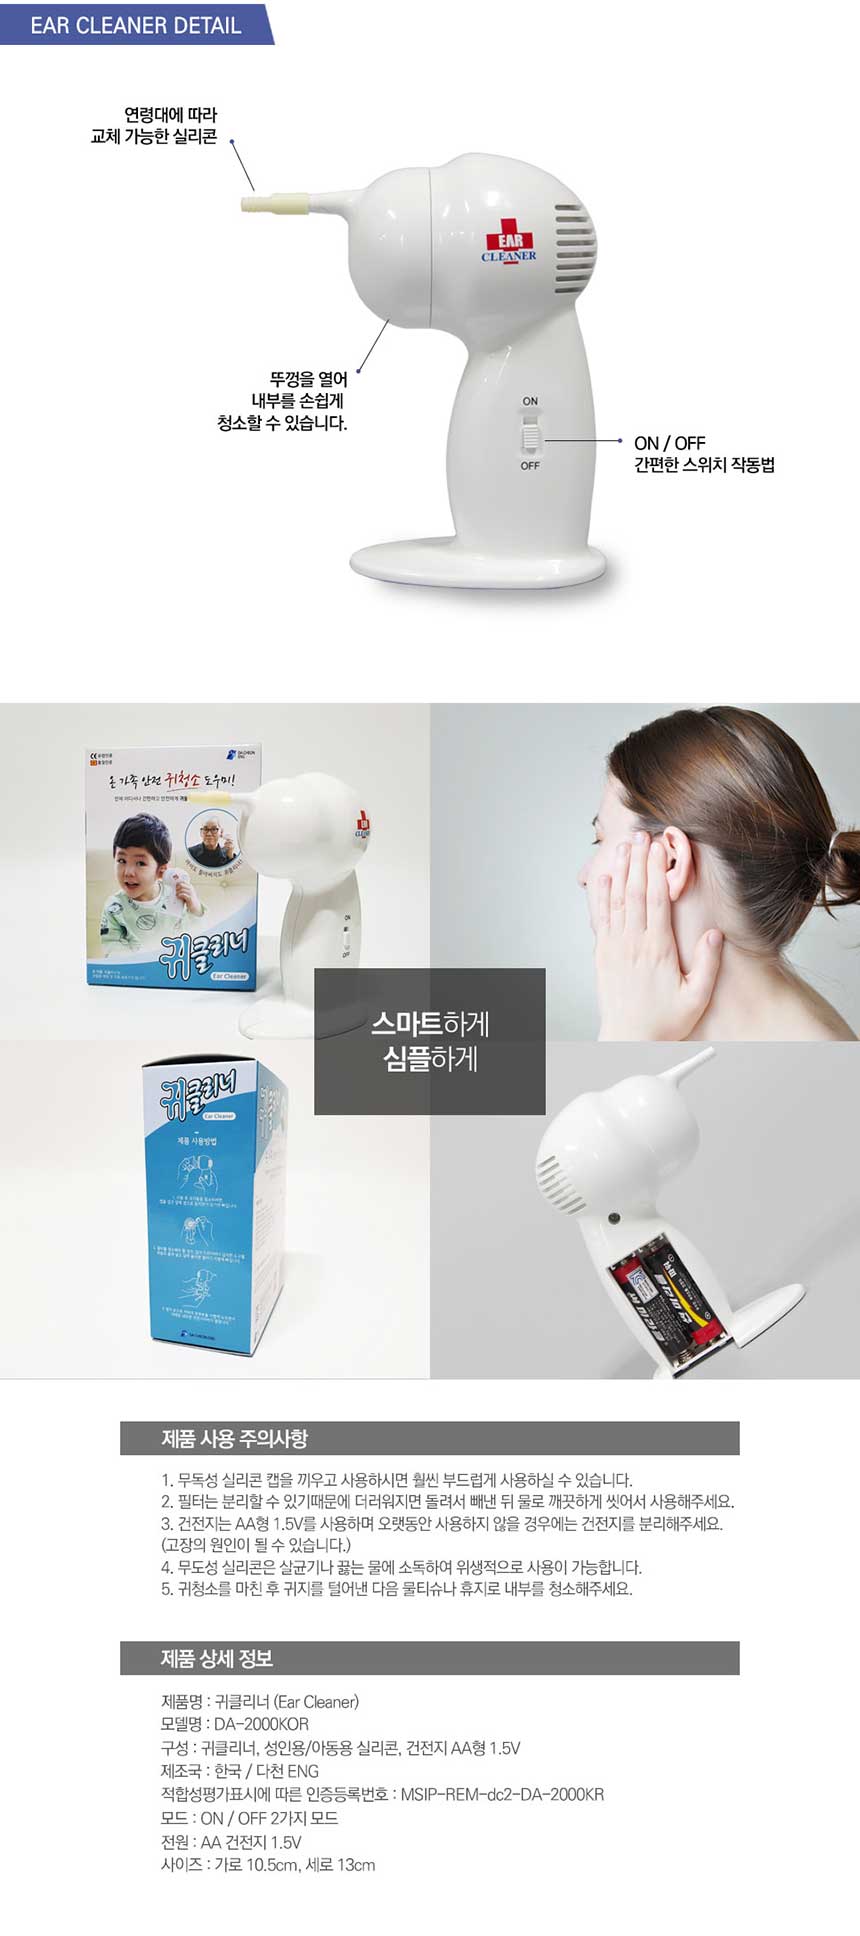 Ear Cleaners Wax Removers Cordless Vacuum Painless Suction Made in Korea Children Senior non-toxic silicone tube infections